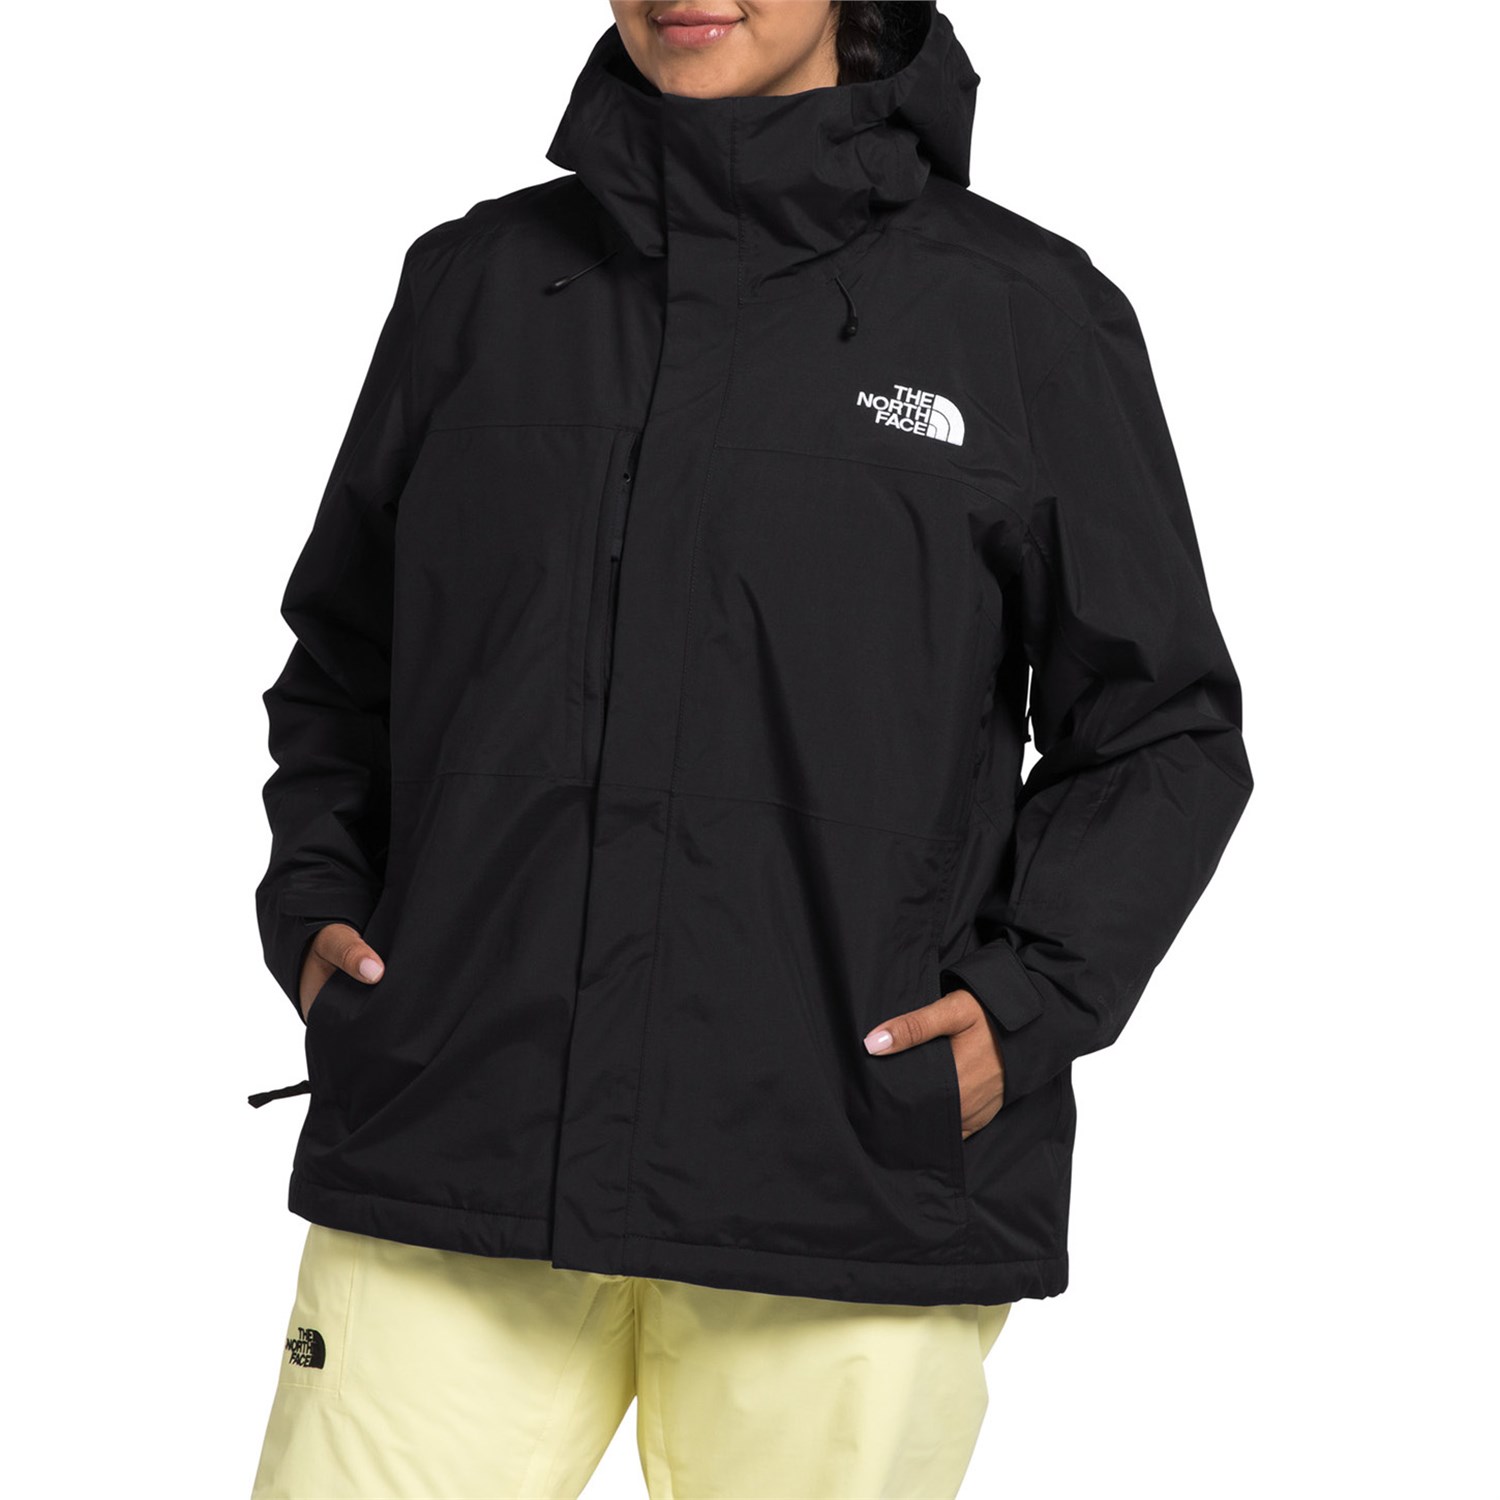 Куртка The North Face Freedom Insulated Plus, черный куртка the north face insulated черный